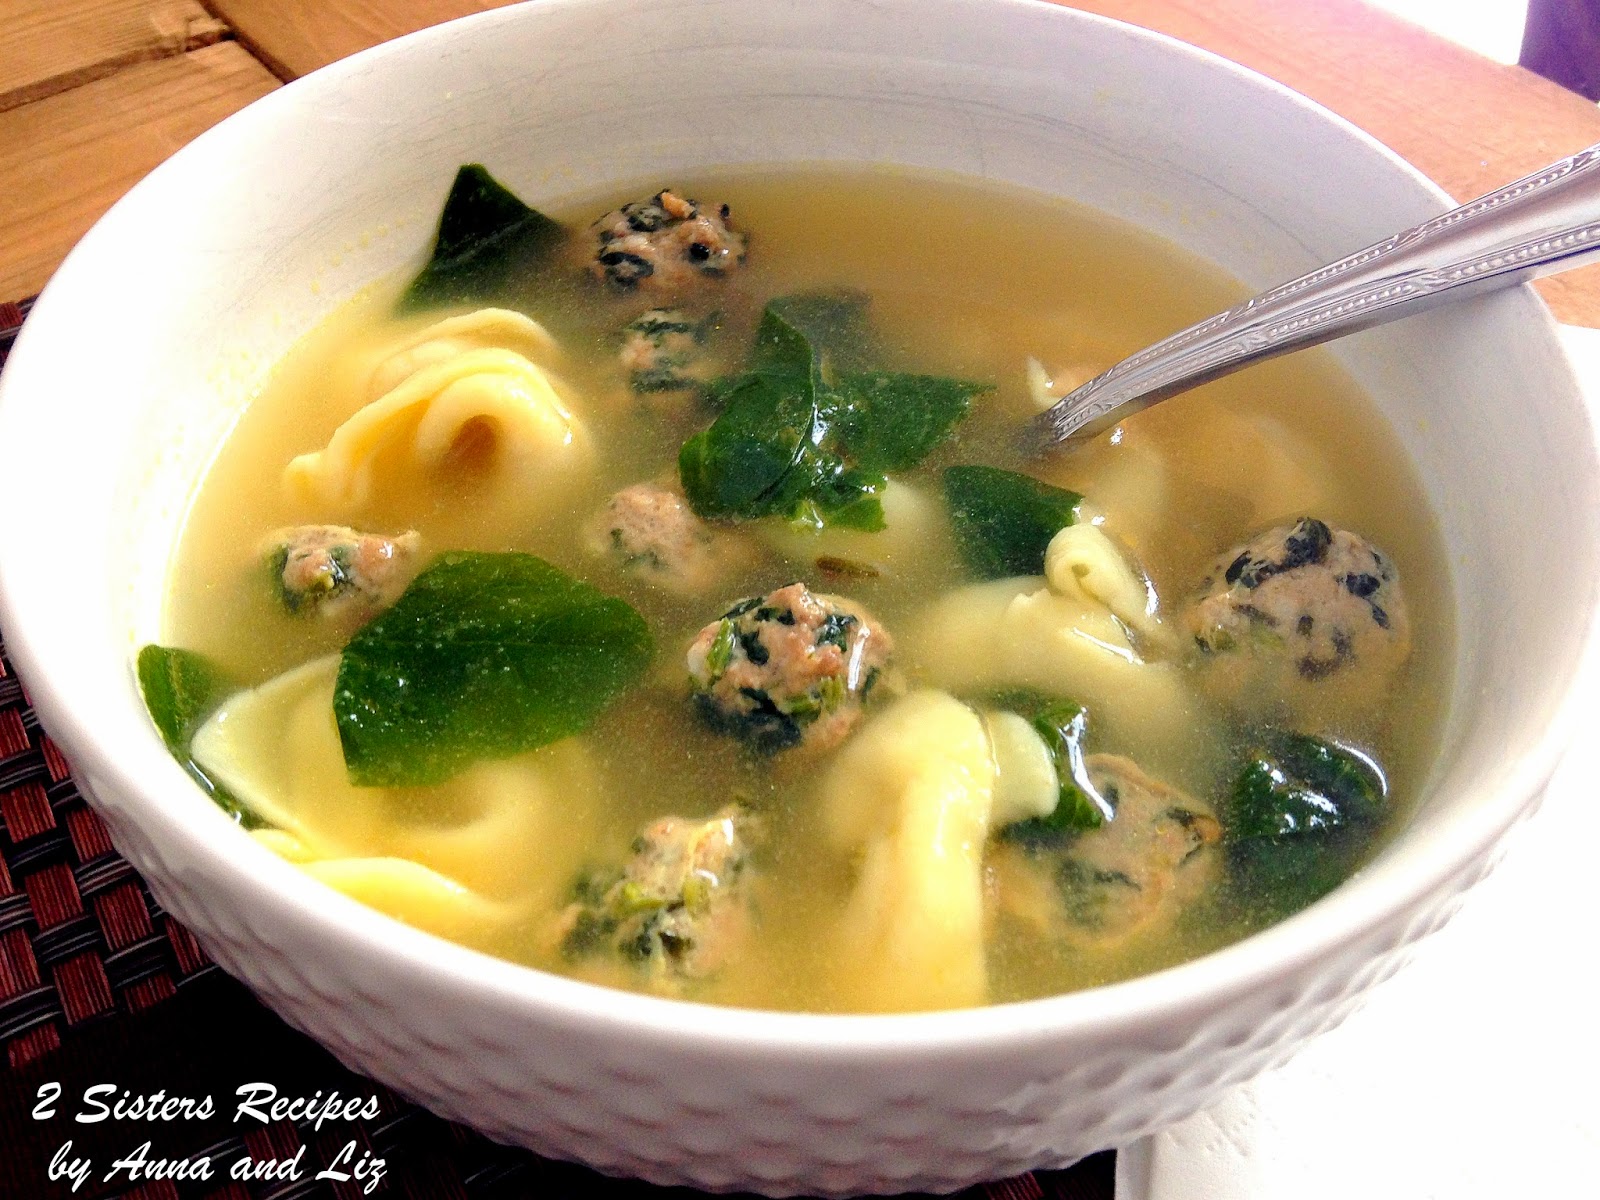 Italian Wedding Soup with Spinach Meatballs by 2sistersrecipes.com